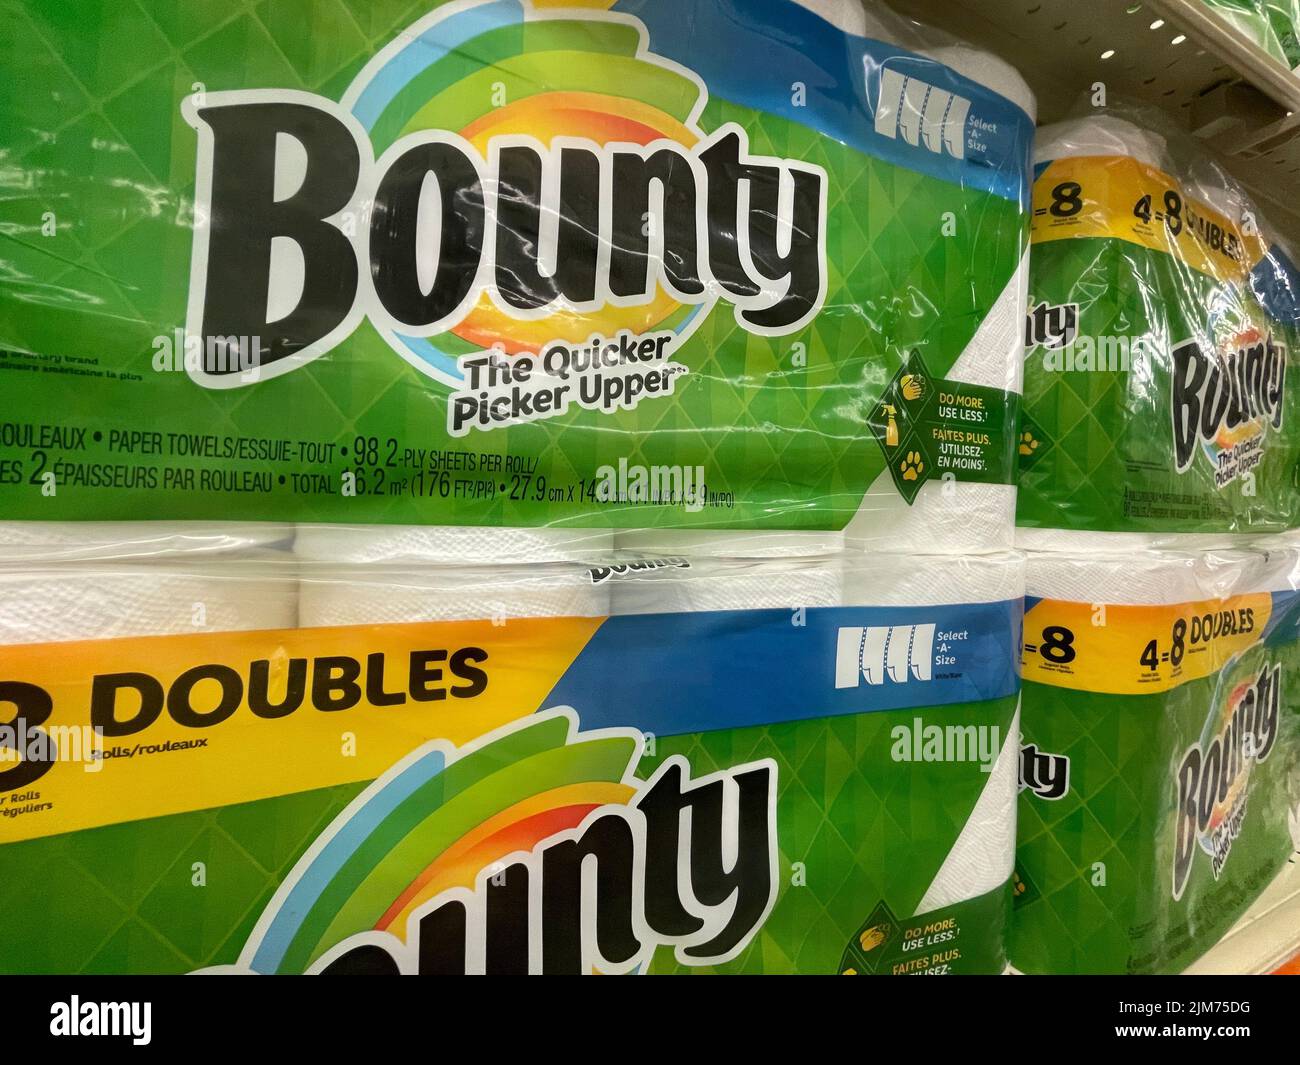 Grovetown, Ga USA - 04 29 22: Retail store Bounty paper towels side view Stock Photo